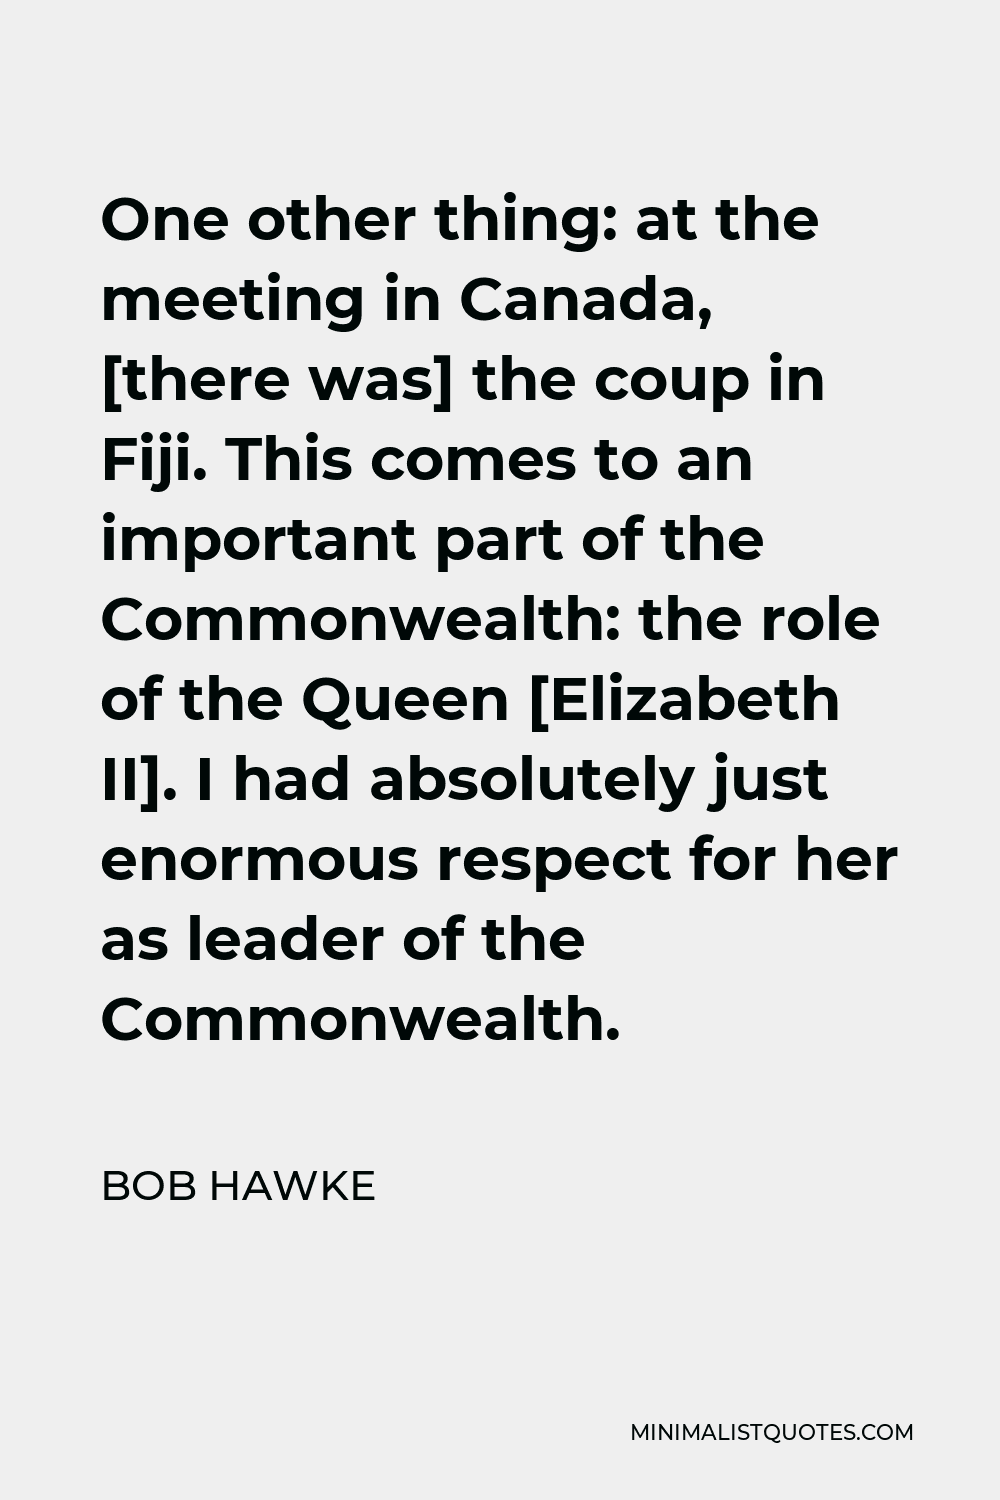 Bob Hawke Quote - One other thing: at the meeting in Canada, [there was] the coup in Fiji. This comes to an important part of the Commonwealth: the role of the Queen [Elizabeth II]. I had absolutely just enormous respect for her as leader of the Commonwealth.